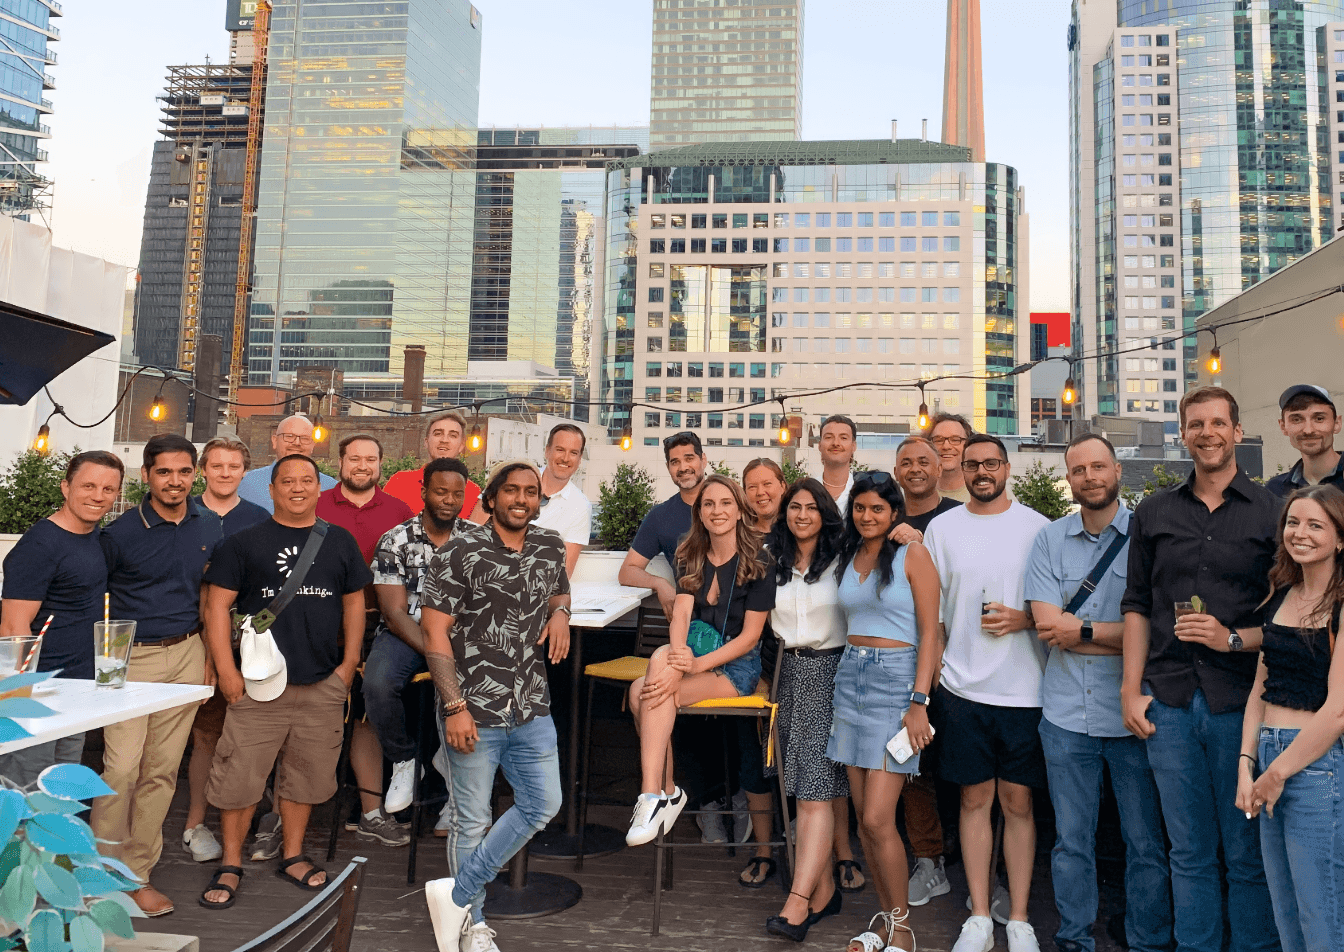 Group shot of 23 team members from AgencyAnalytics